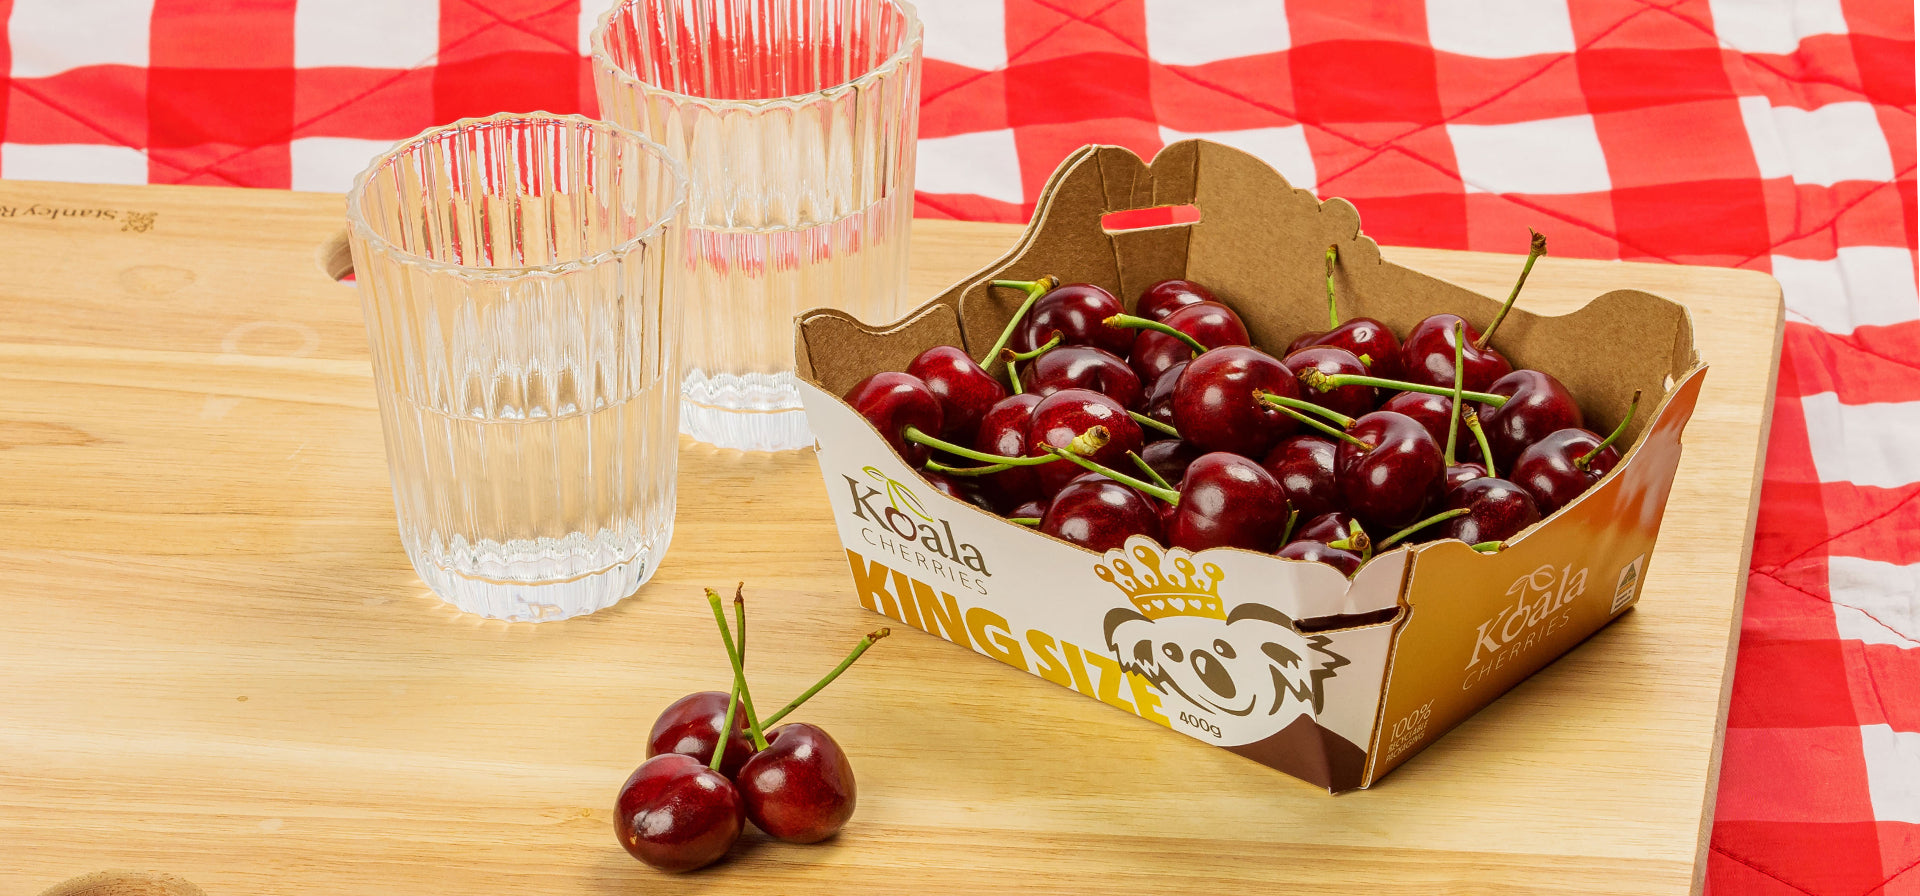 Koala king size cherries in cardboard recyclable packaging on a picnic rug with a wooden chopping board and two glasses of water